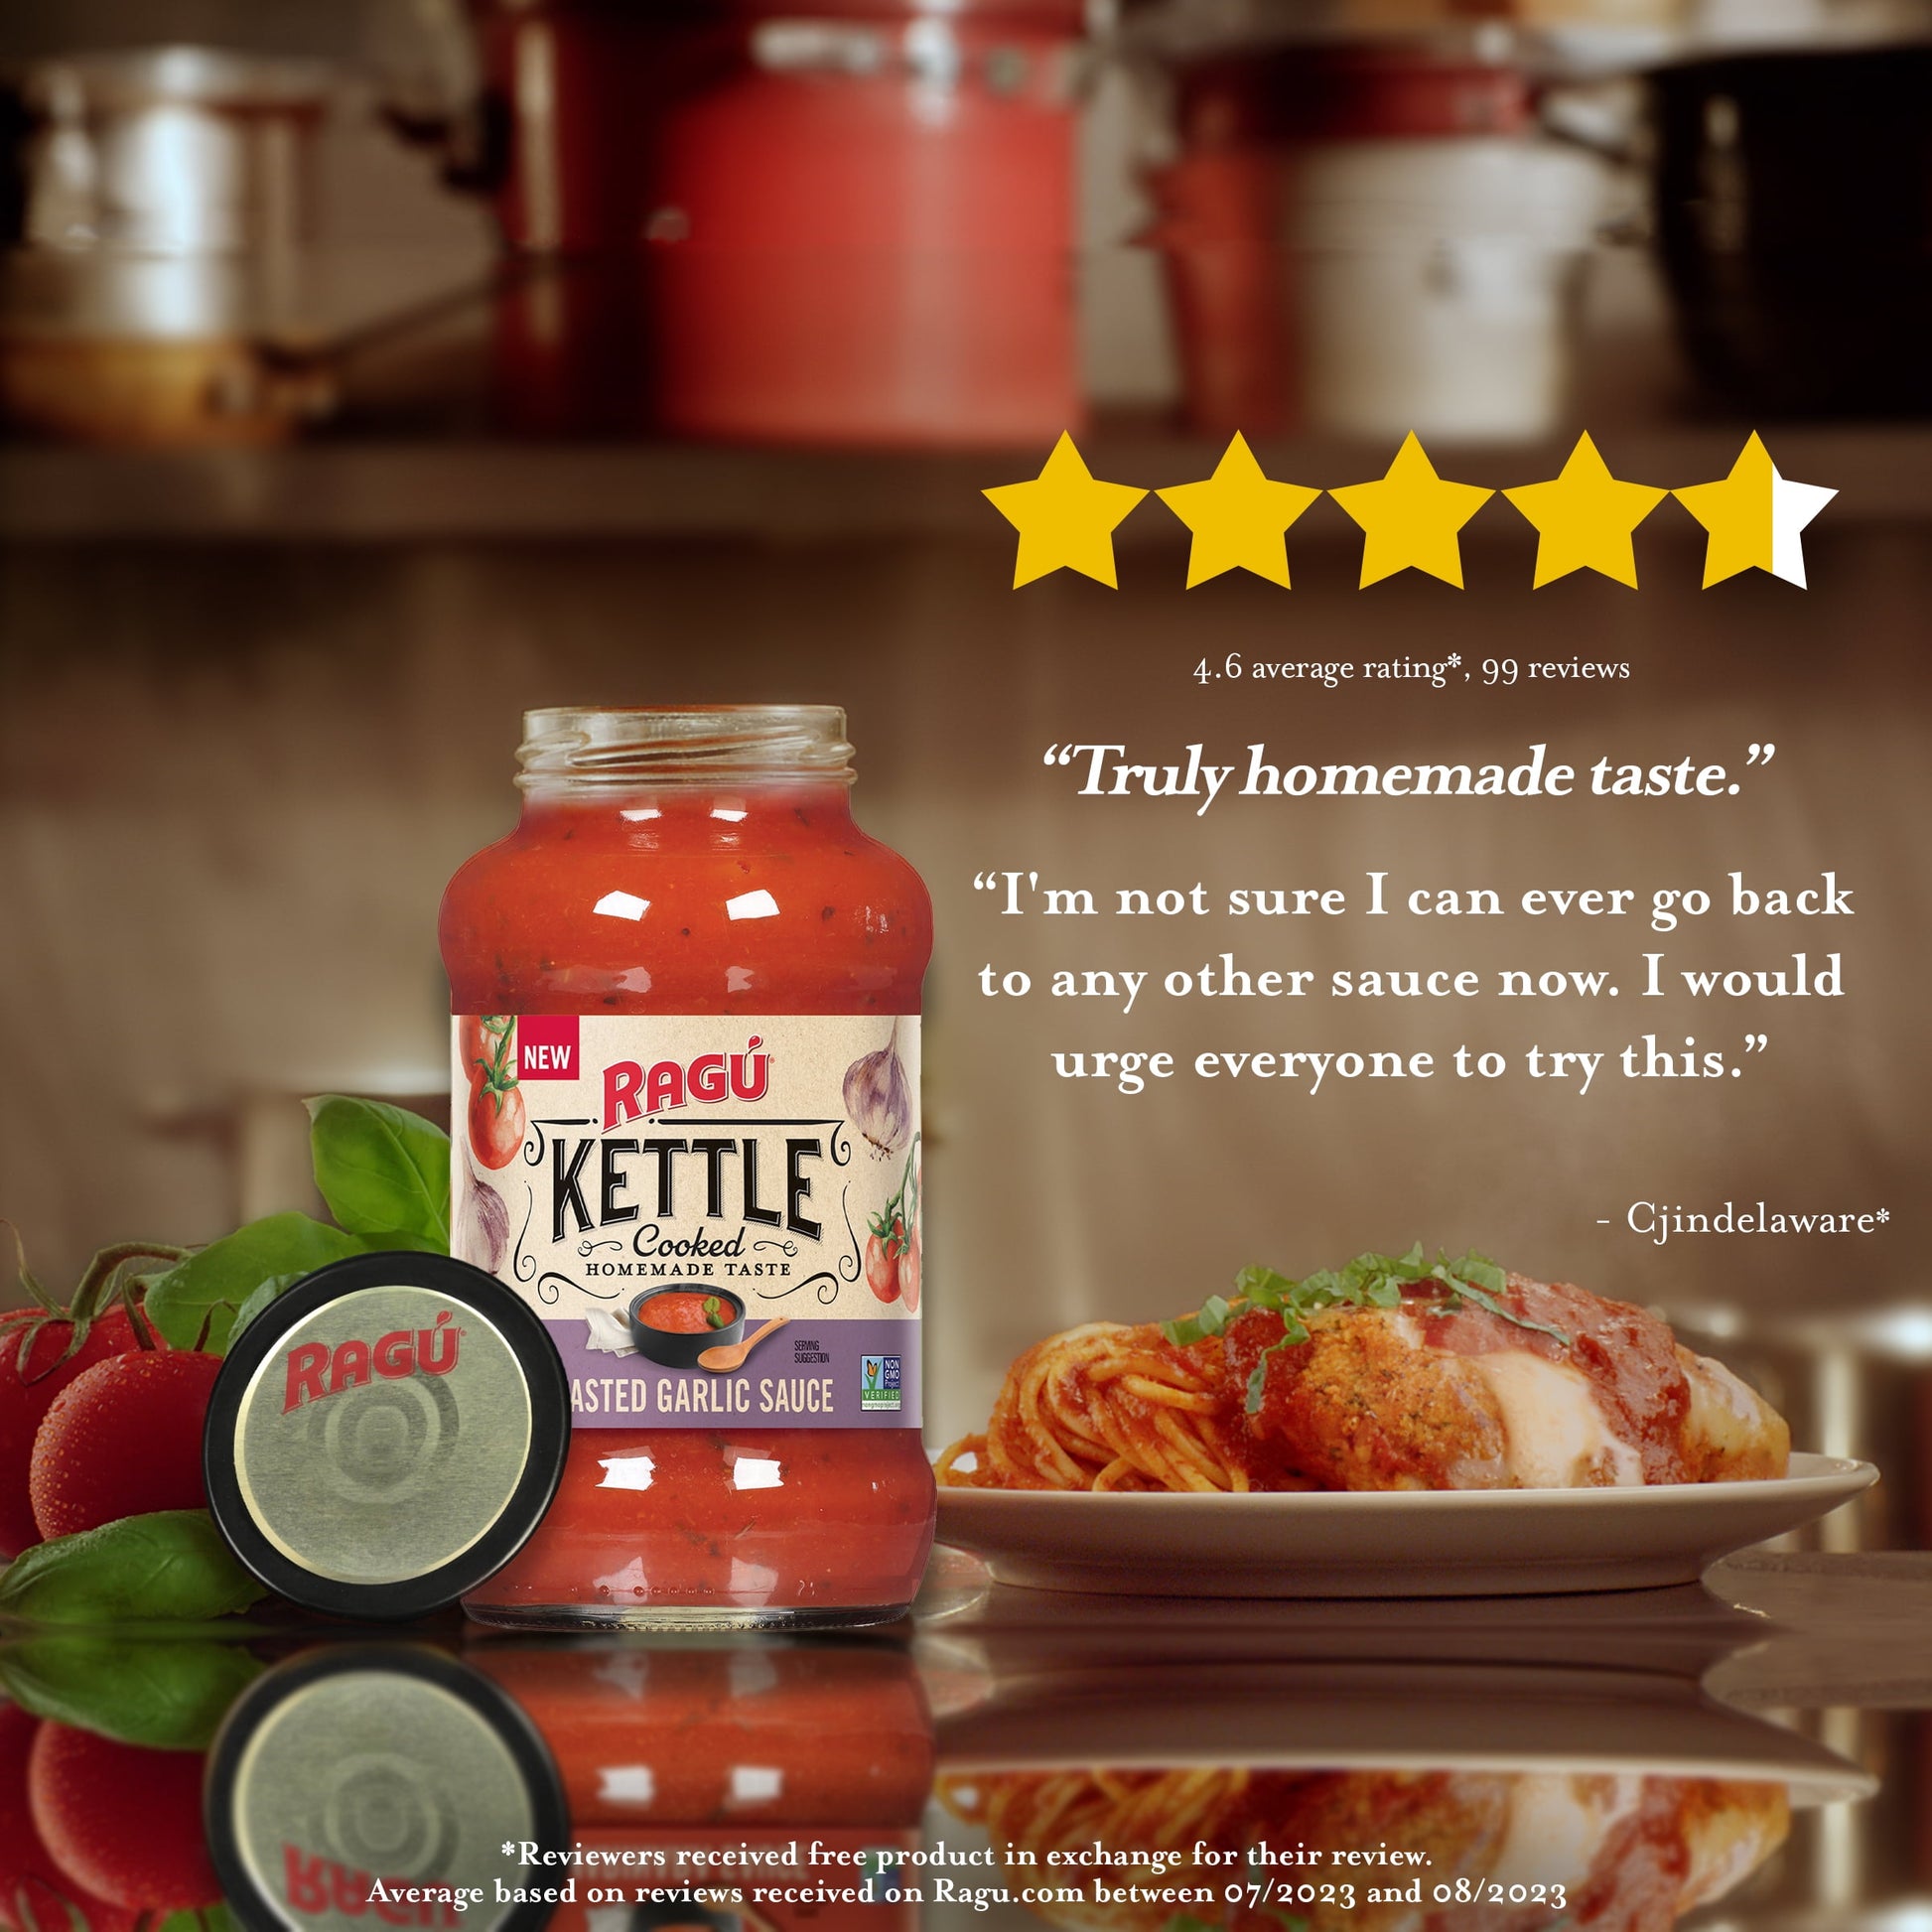 Kettle Cooked Roasted Garlic Pasta Sauce, Slow-Simmered, 24 Oz